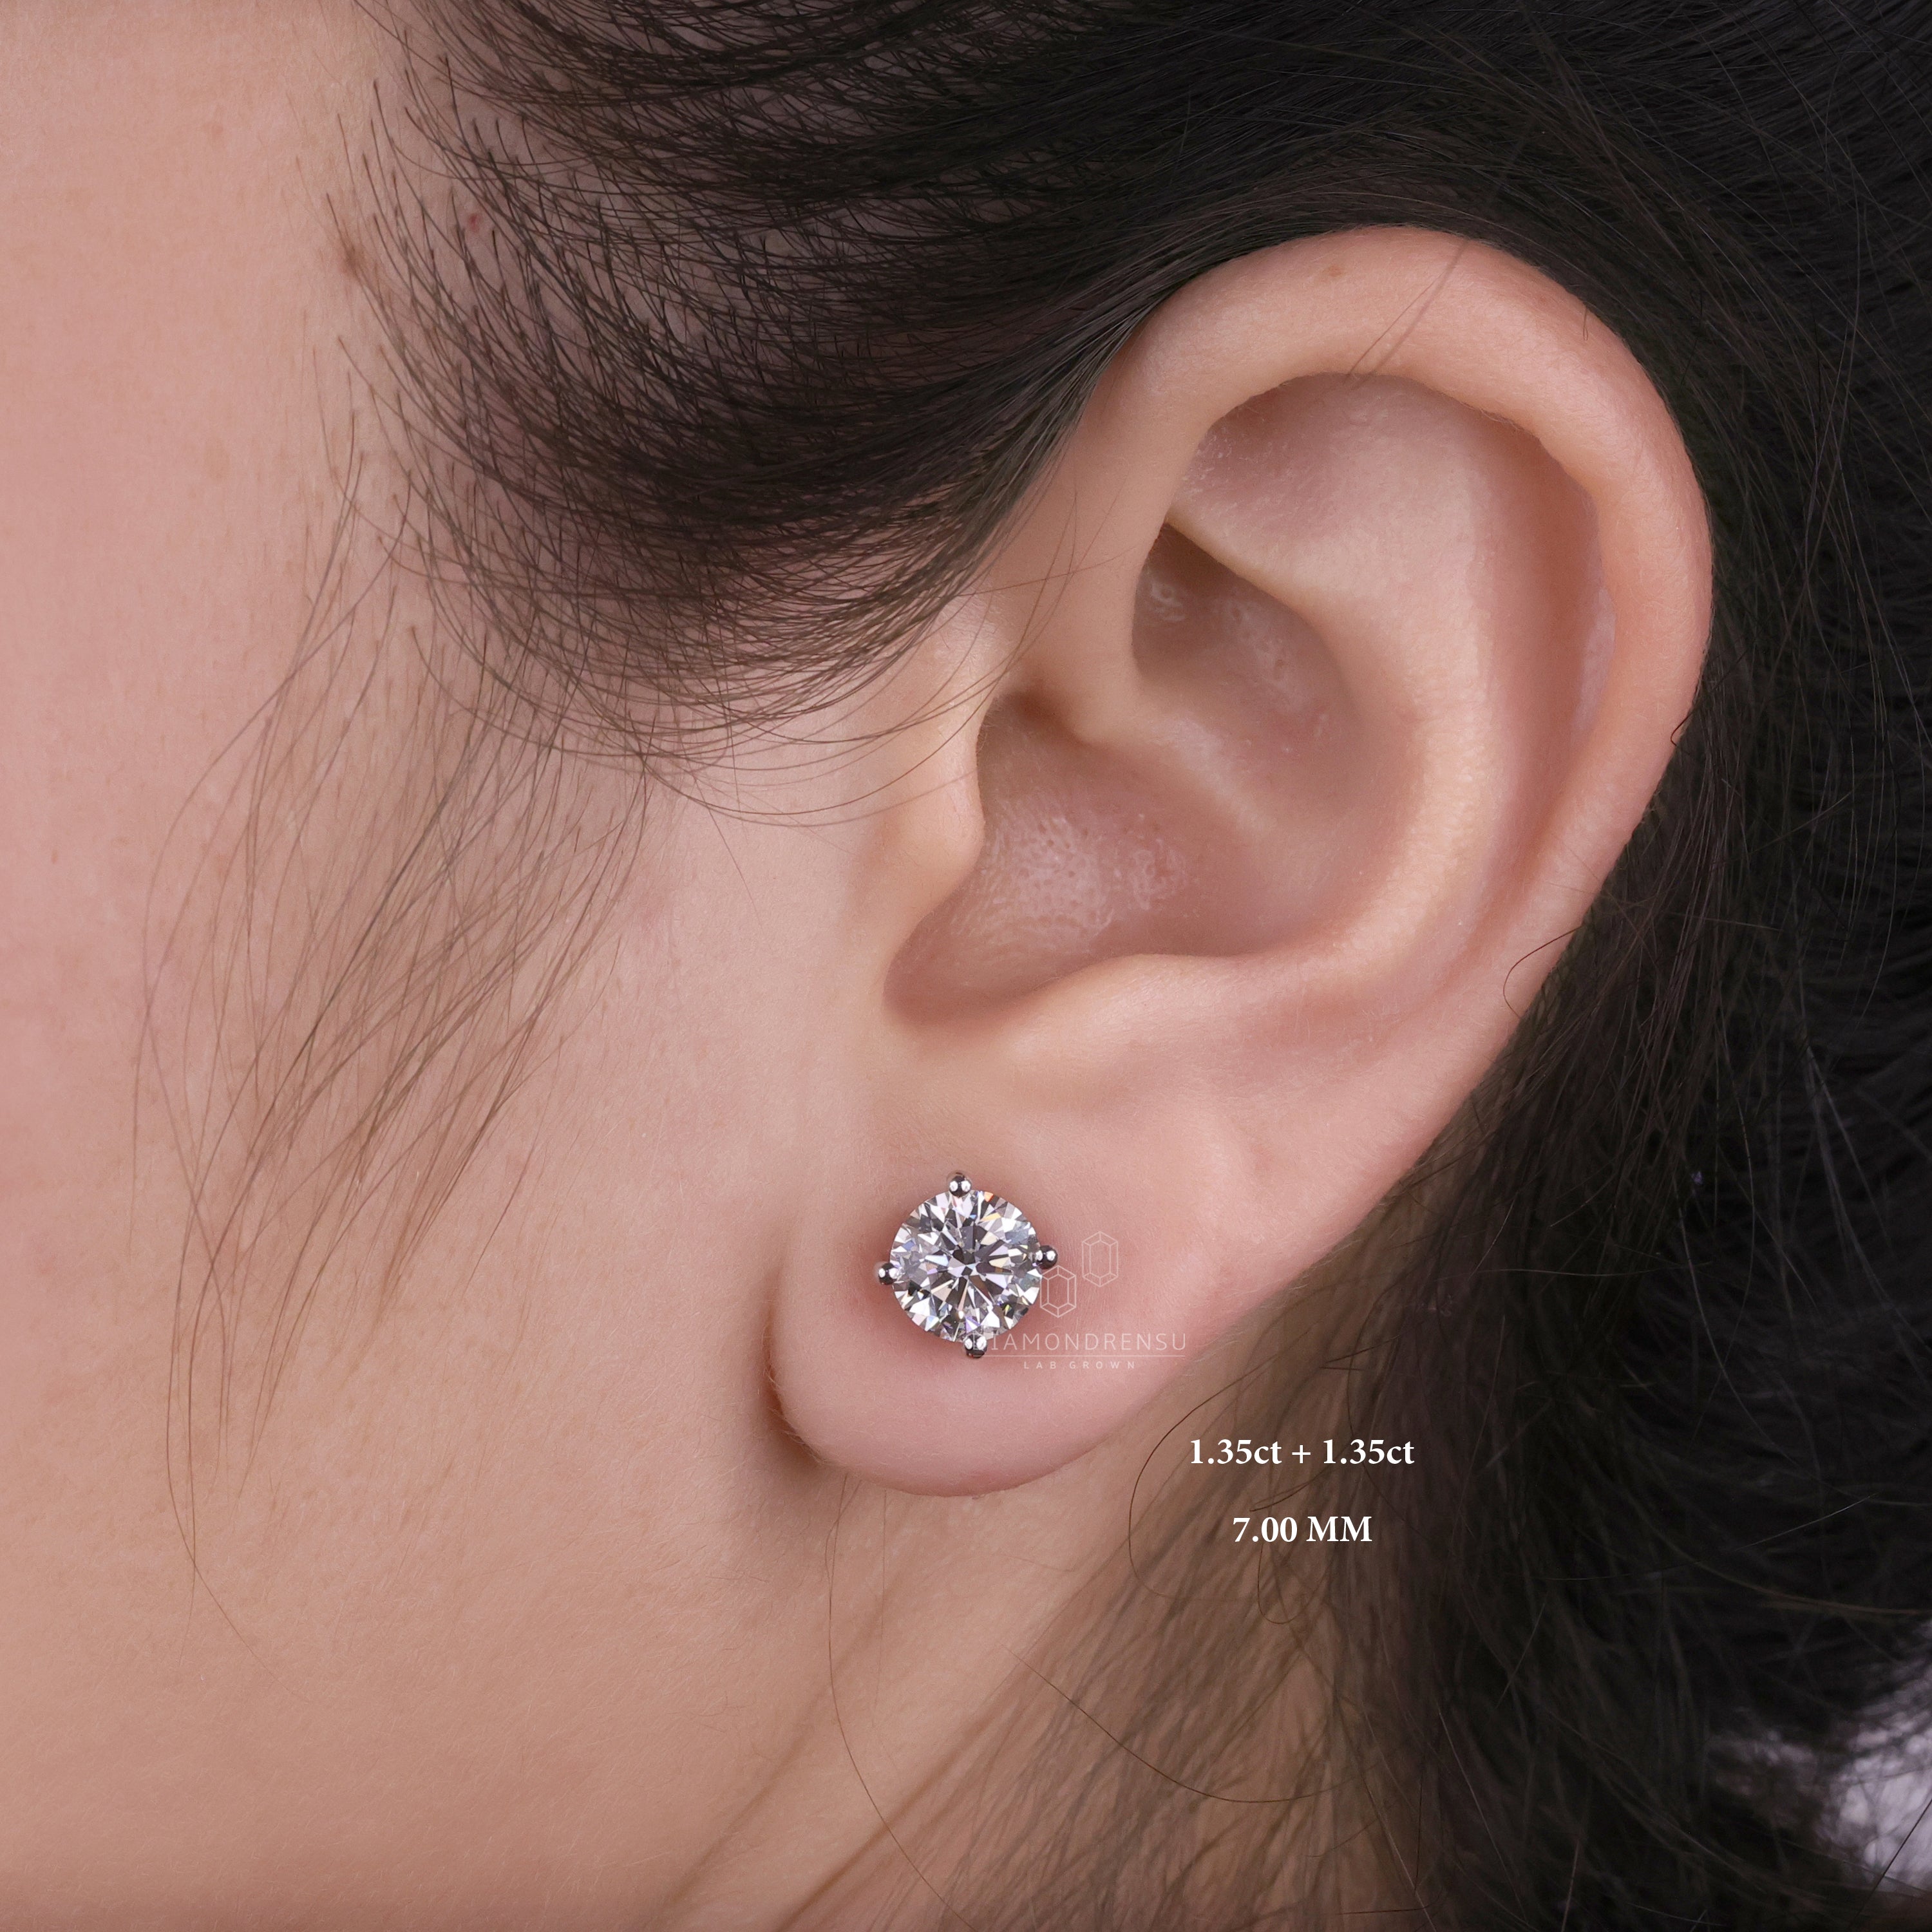 Model displaying gold and diamond stud earrings, focusing on their intricate design and lustrous appeal